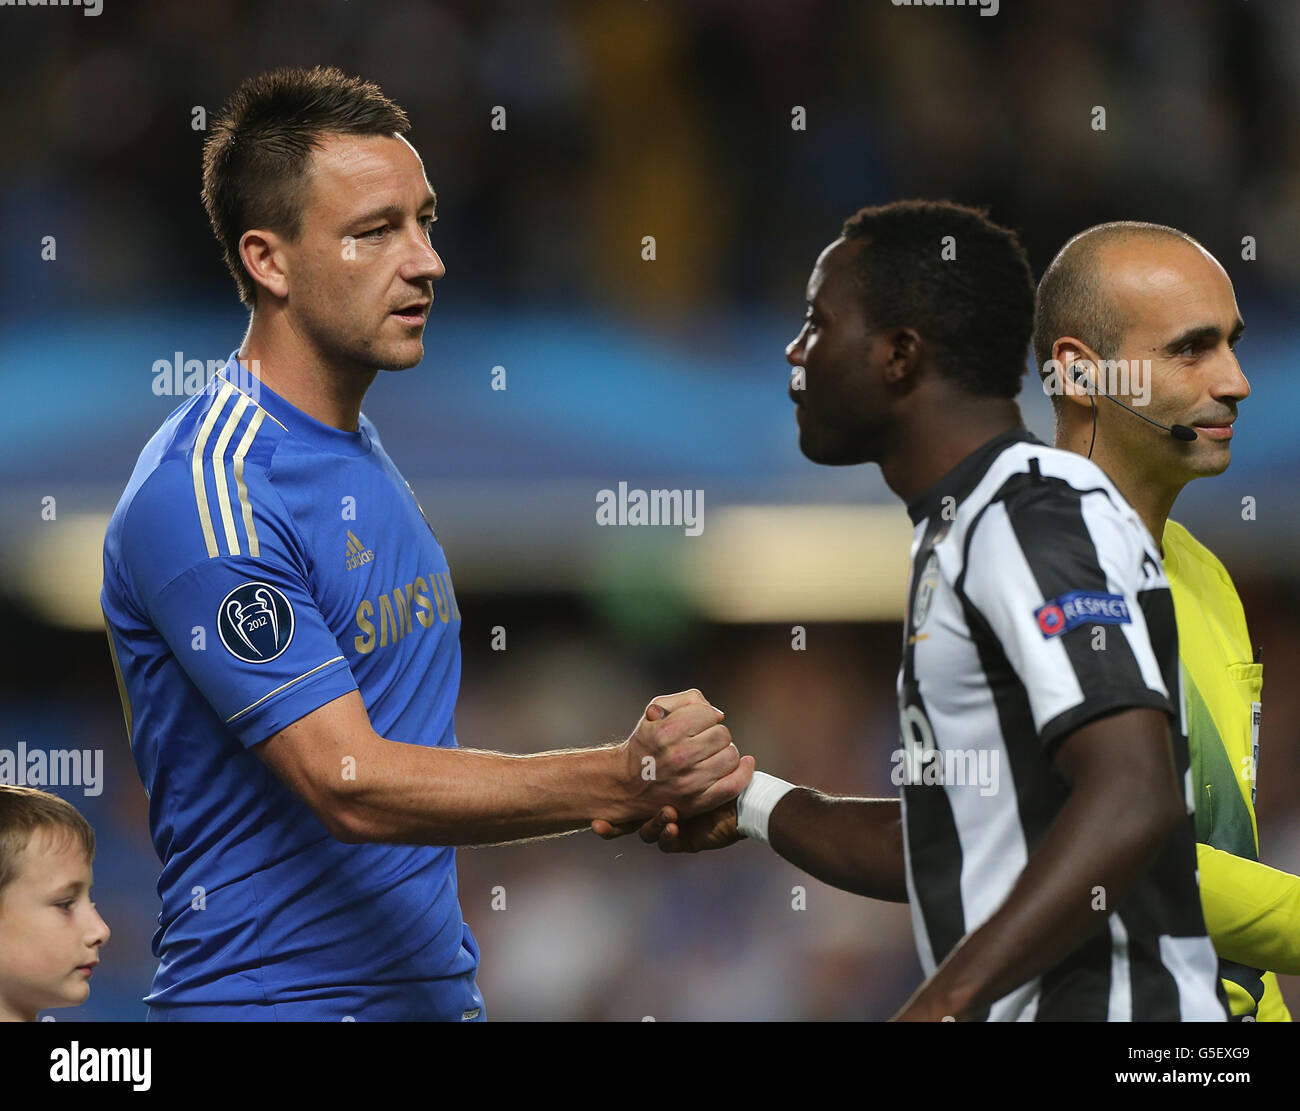 Soccer - UEFA Champions League - Group E - Chelsea v Juventus - Stamford Bridge. Juventus's Kwadwo Asamoah (right) and Chelsea's John Terry shake hands before the match Stock Photo